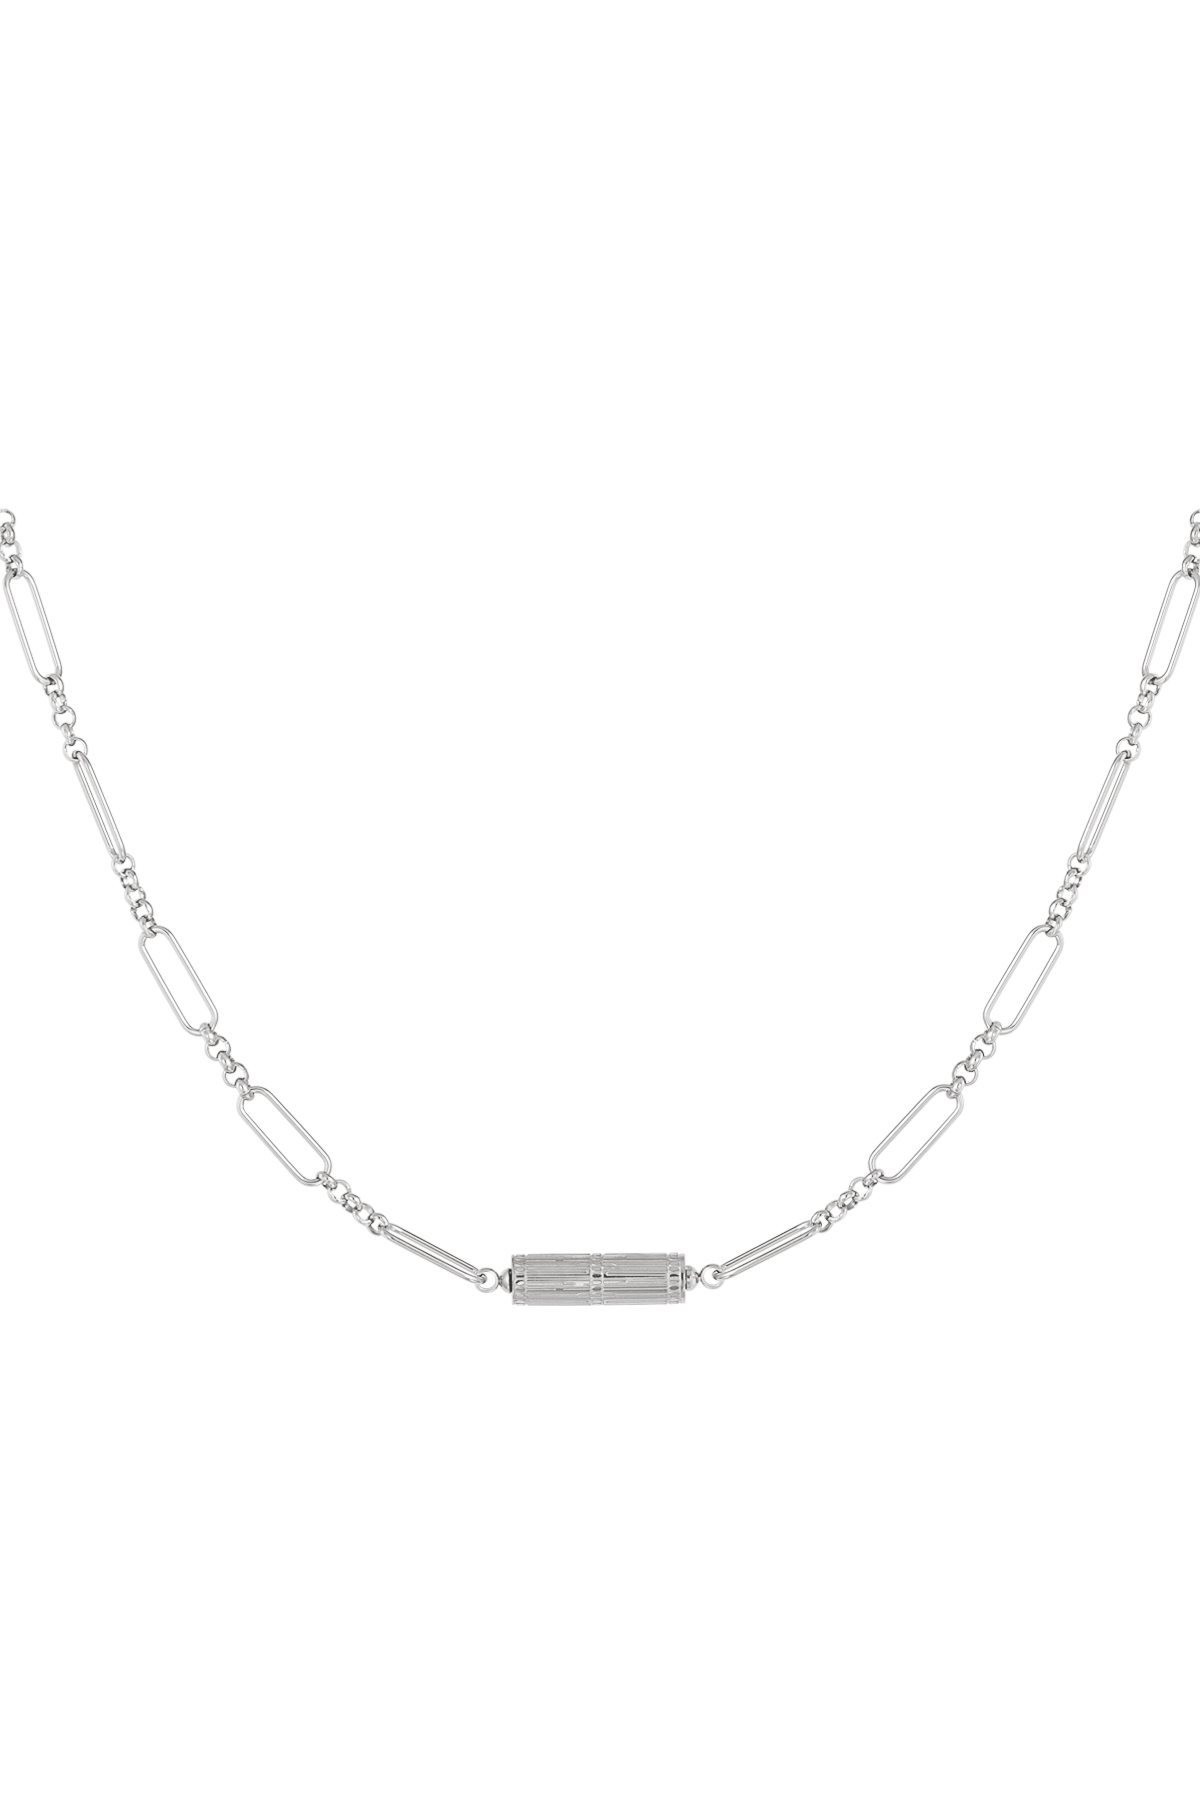 Link chain with charm - silver Stainless Steel h5 